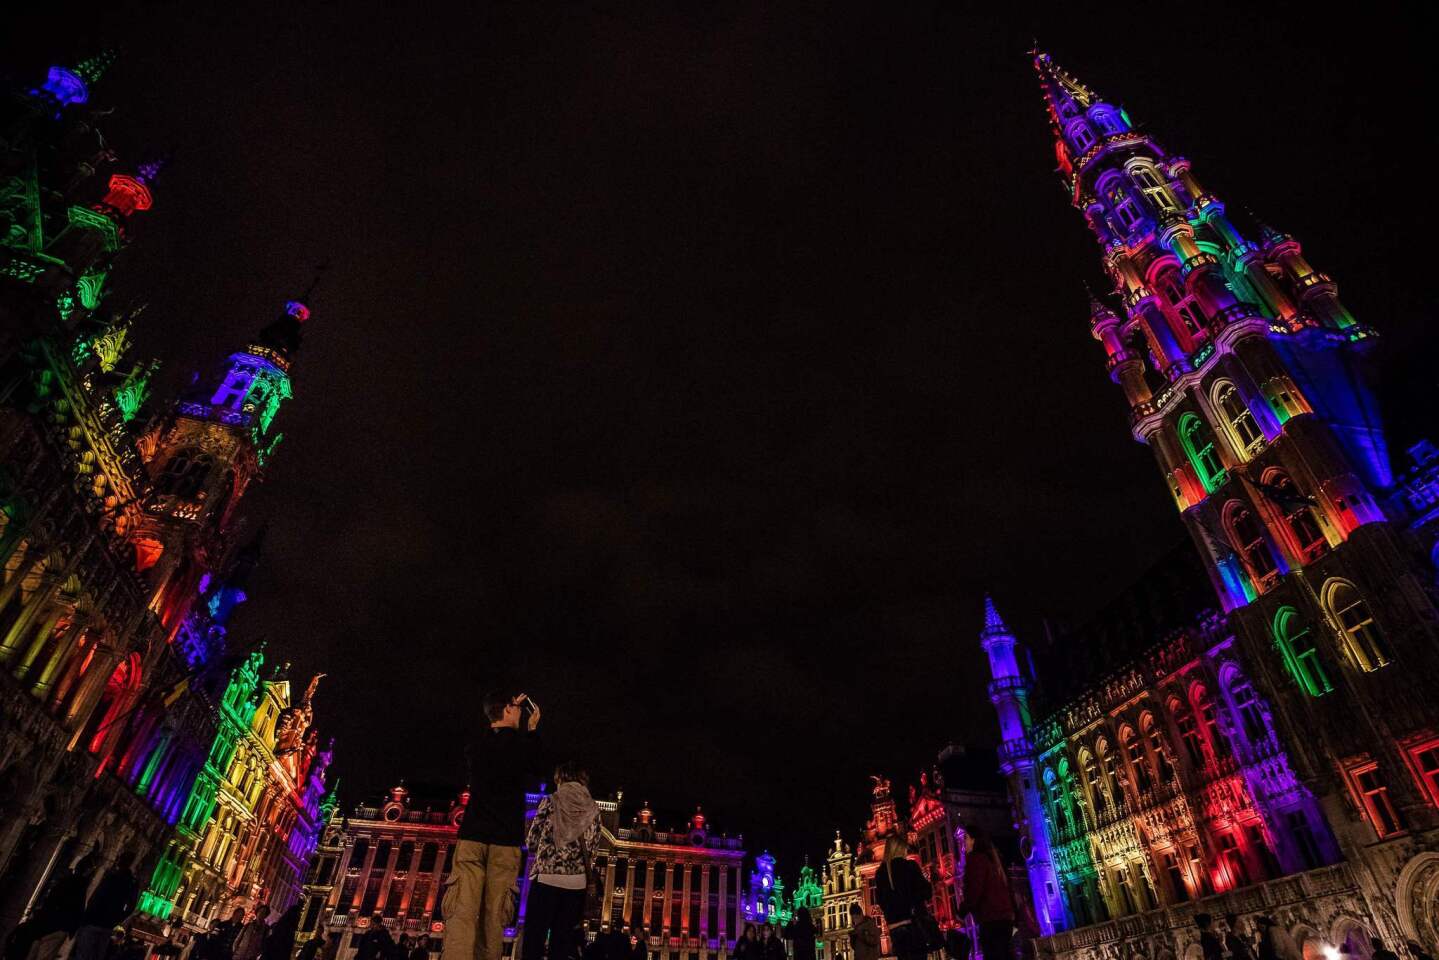 The city hall and the heritage buildings on the Brussels Grand Place/Grote Markt are showered in the colors of the LGBT rainbow flag June 13, 2016 in support of the victims of the Orlando shooting.